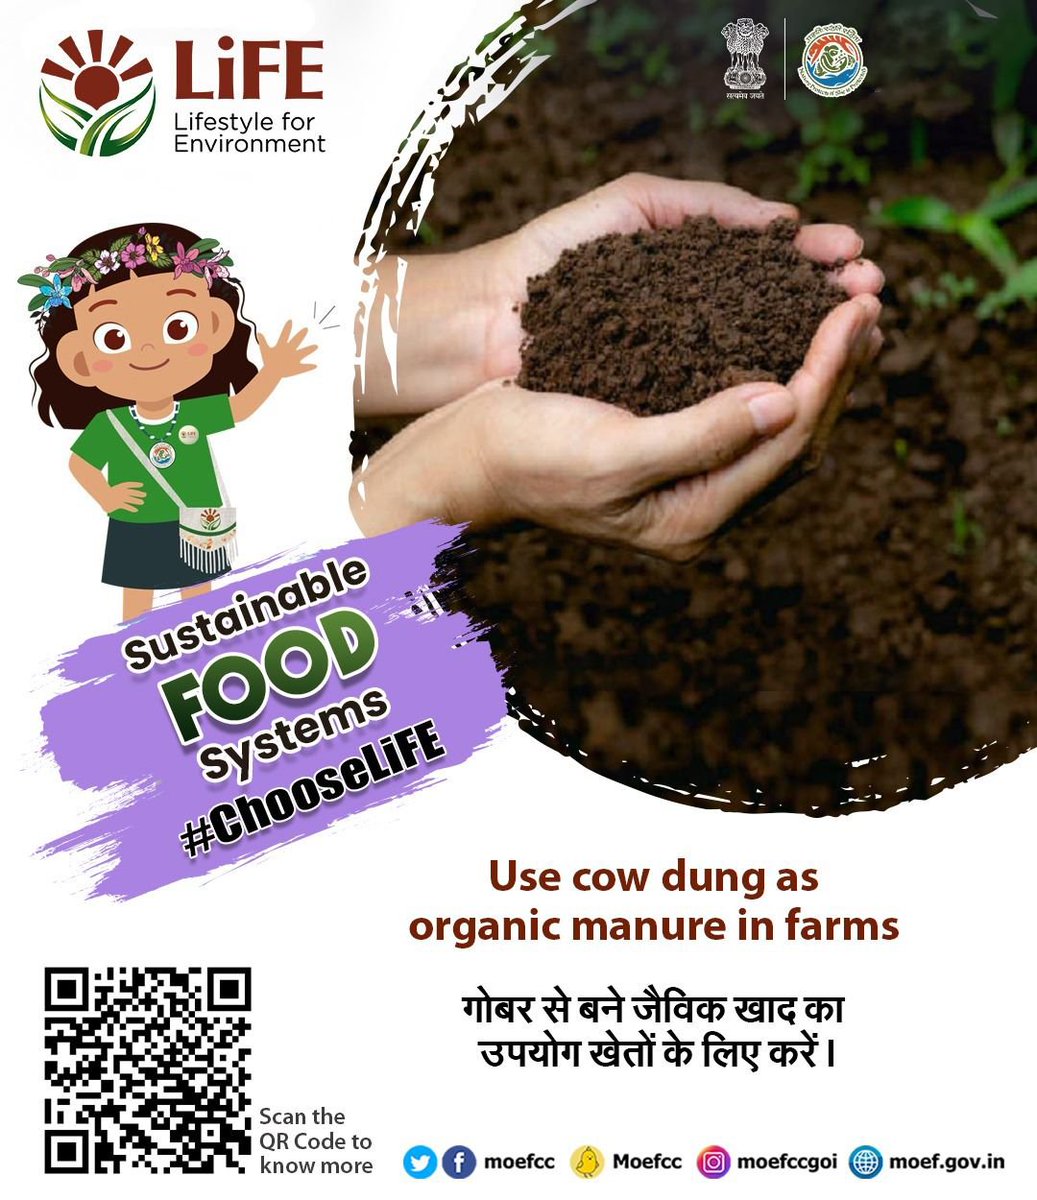 Let's promote sustainable food systems by using cow dung as organic manure in farms! 🌱🌍 Let's make a positive impact on our environment and agriculture. Join the movement! @MIB_India @moefcc #MissionLiFE #ChooseLiFE #OrganicFarming #ClimateAction